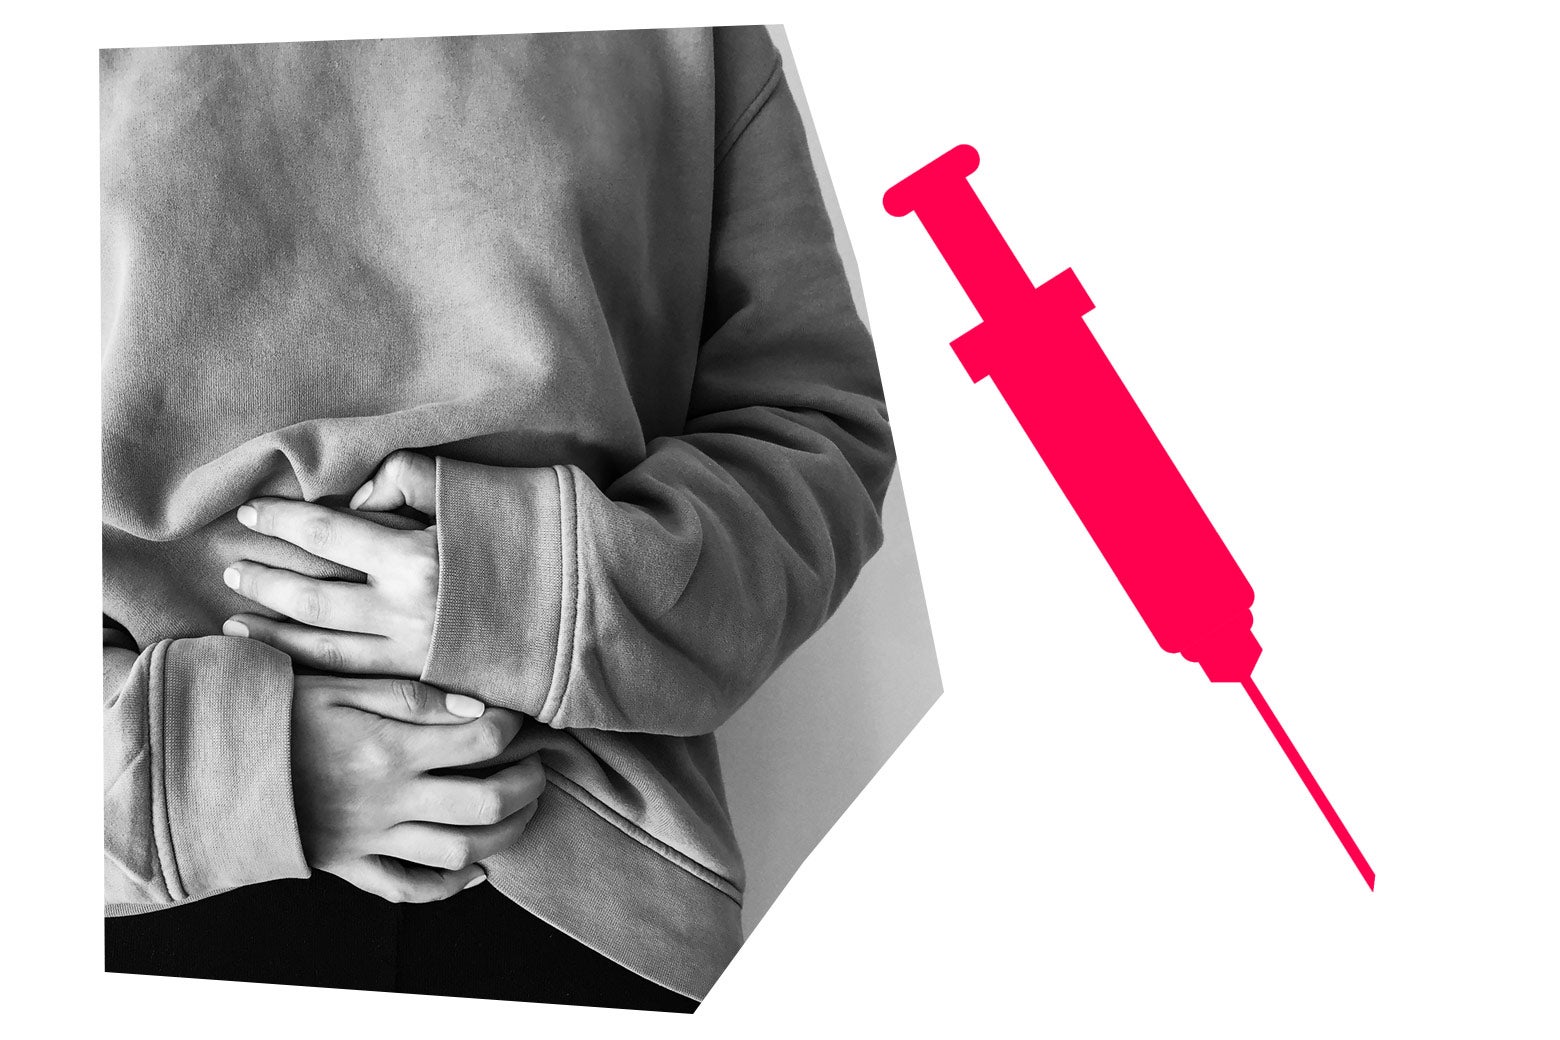 Collage of a woman in a sweatshirt clutching her stomach beside a graphic of a syringe